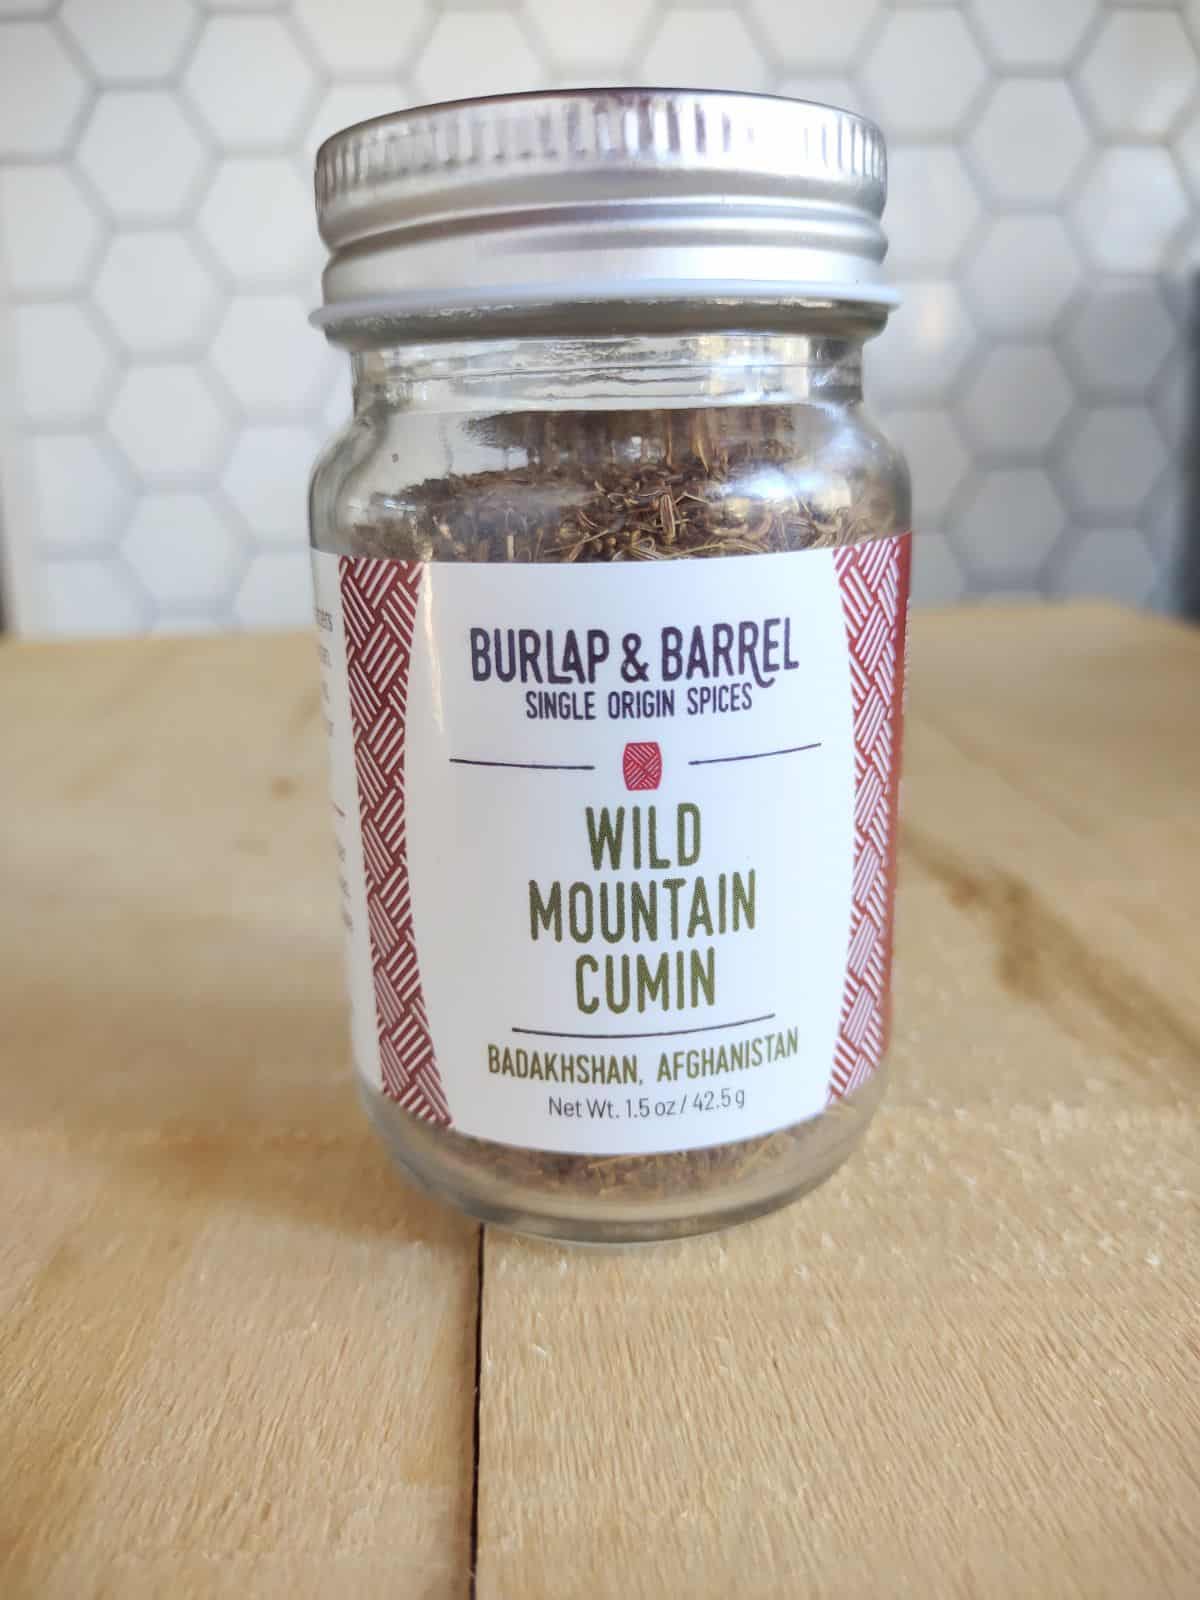 A jar of Burlap & Barrel Wild Mountain Cumin sitting on a wood board with a title background. This spice was featured on Shark Tank.